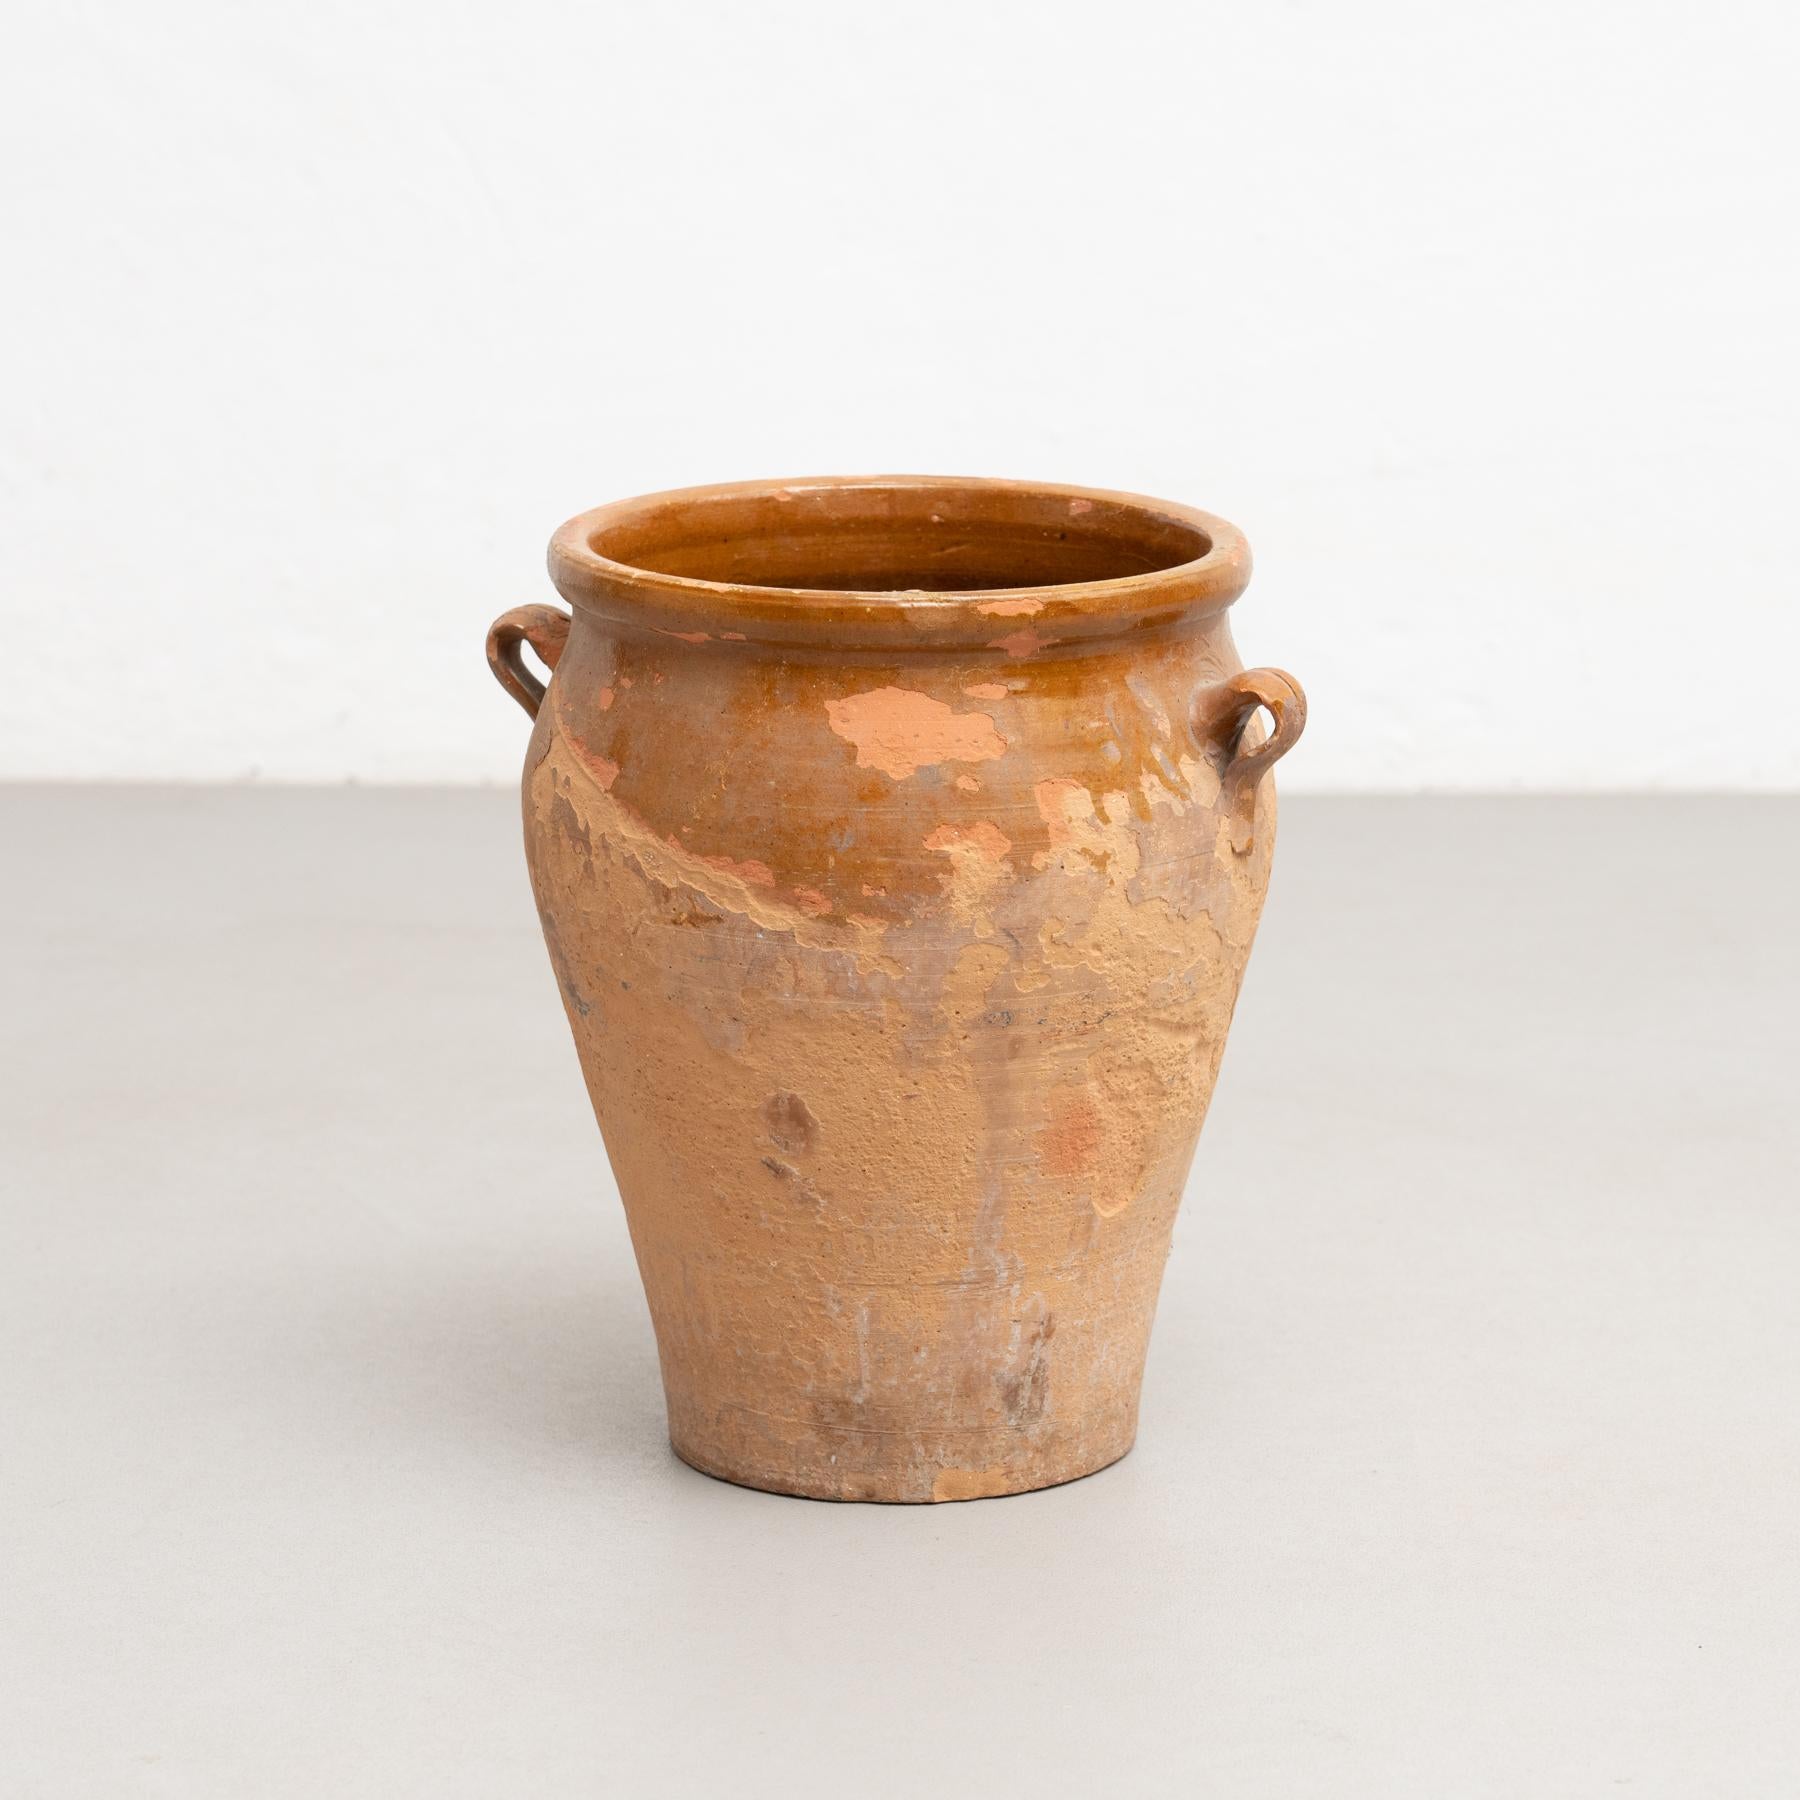 Traditional Spanish rustic ceramic vase.

Manufactured in Spain by unknown manufacturer, circa 1960.

In original condition, with minor wear consistent of age and use, preserving a beautiul patina.

Material:
Ceramic.
 